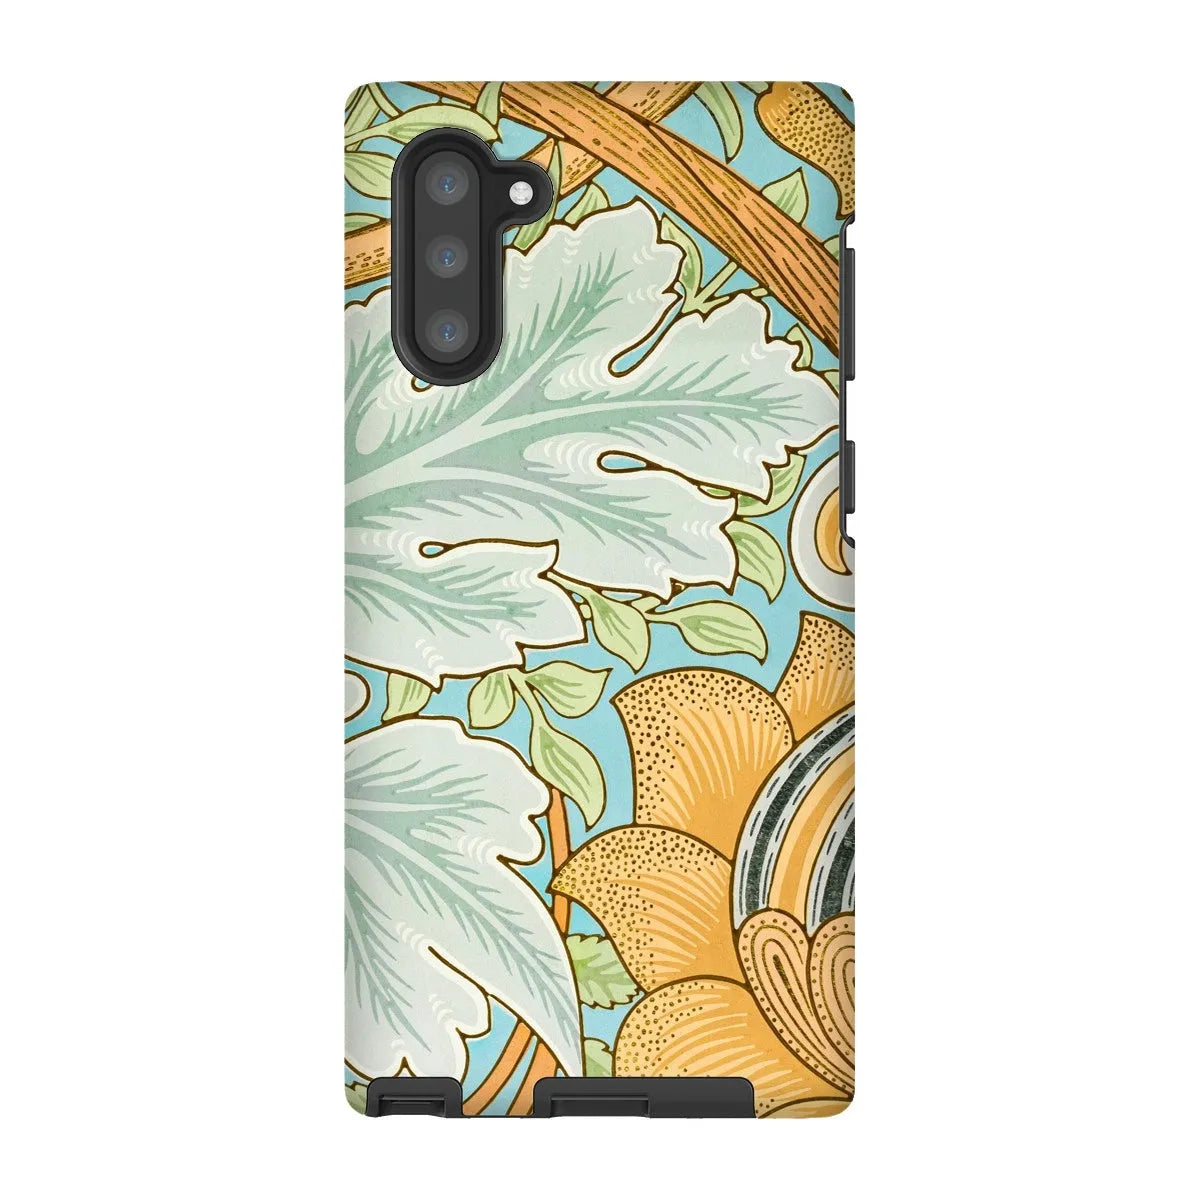 St. James - Arts And Crafts Phone Case - William Morris - Samsung Galaxy Note 10 / Matte - Mobile Phone Cases